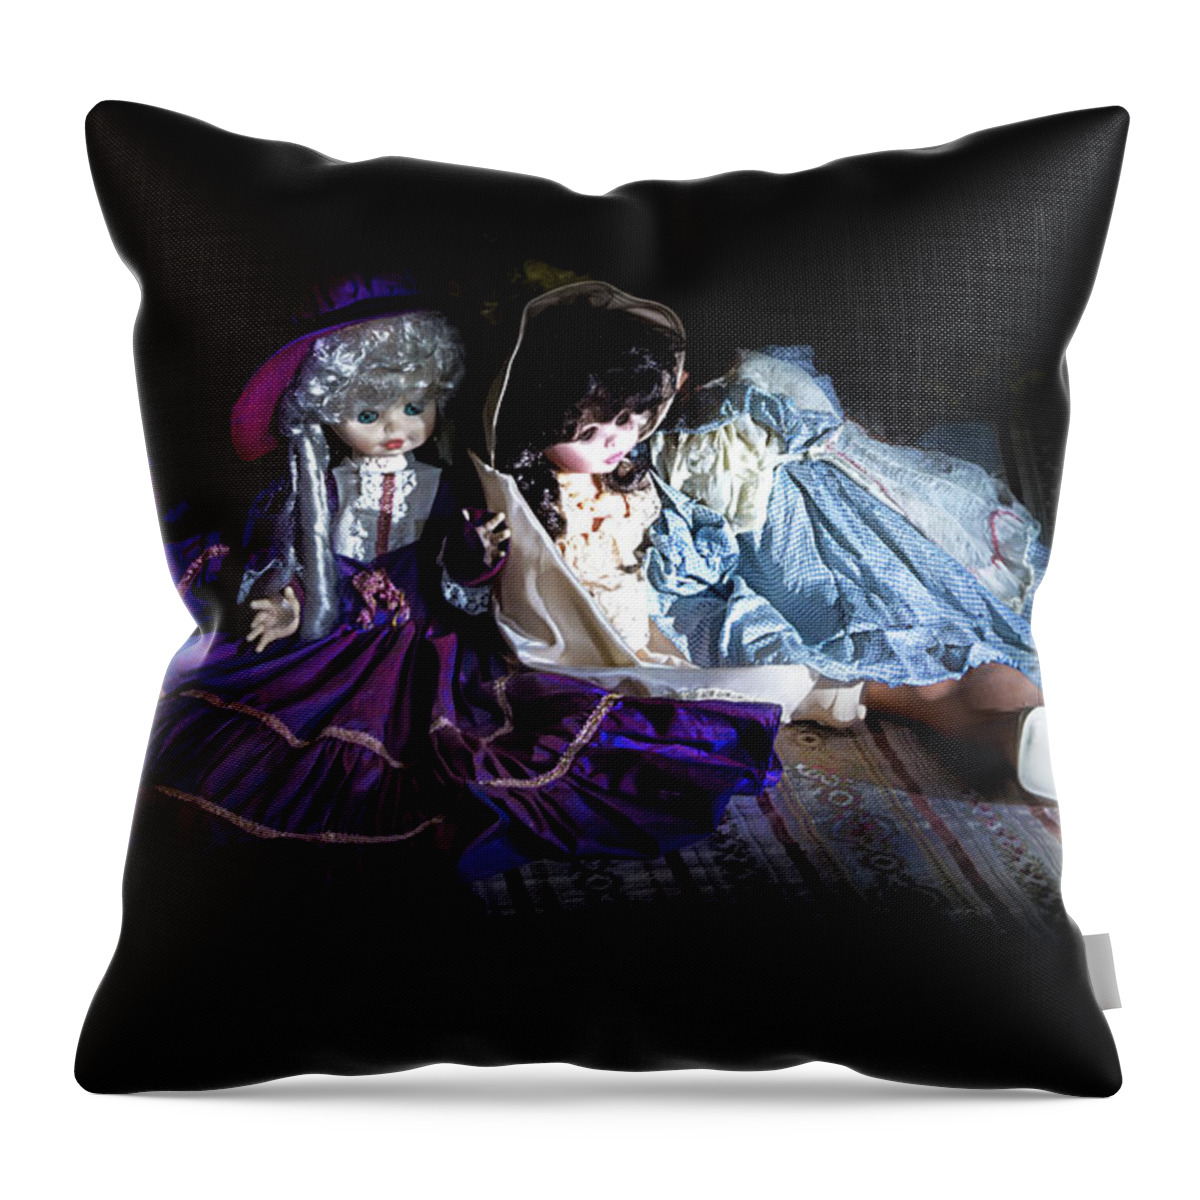 Enrico Pelos Throw Pillow featuring the photograph The Abandoned Village Of The House Of The Dolls II by Enrico Pelos